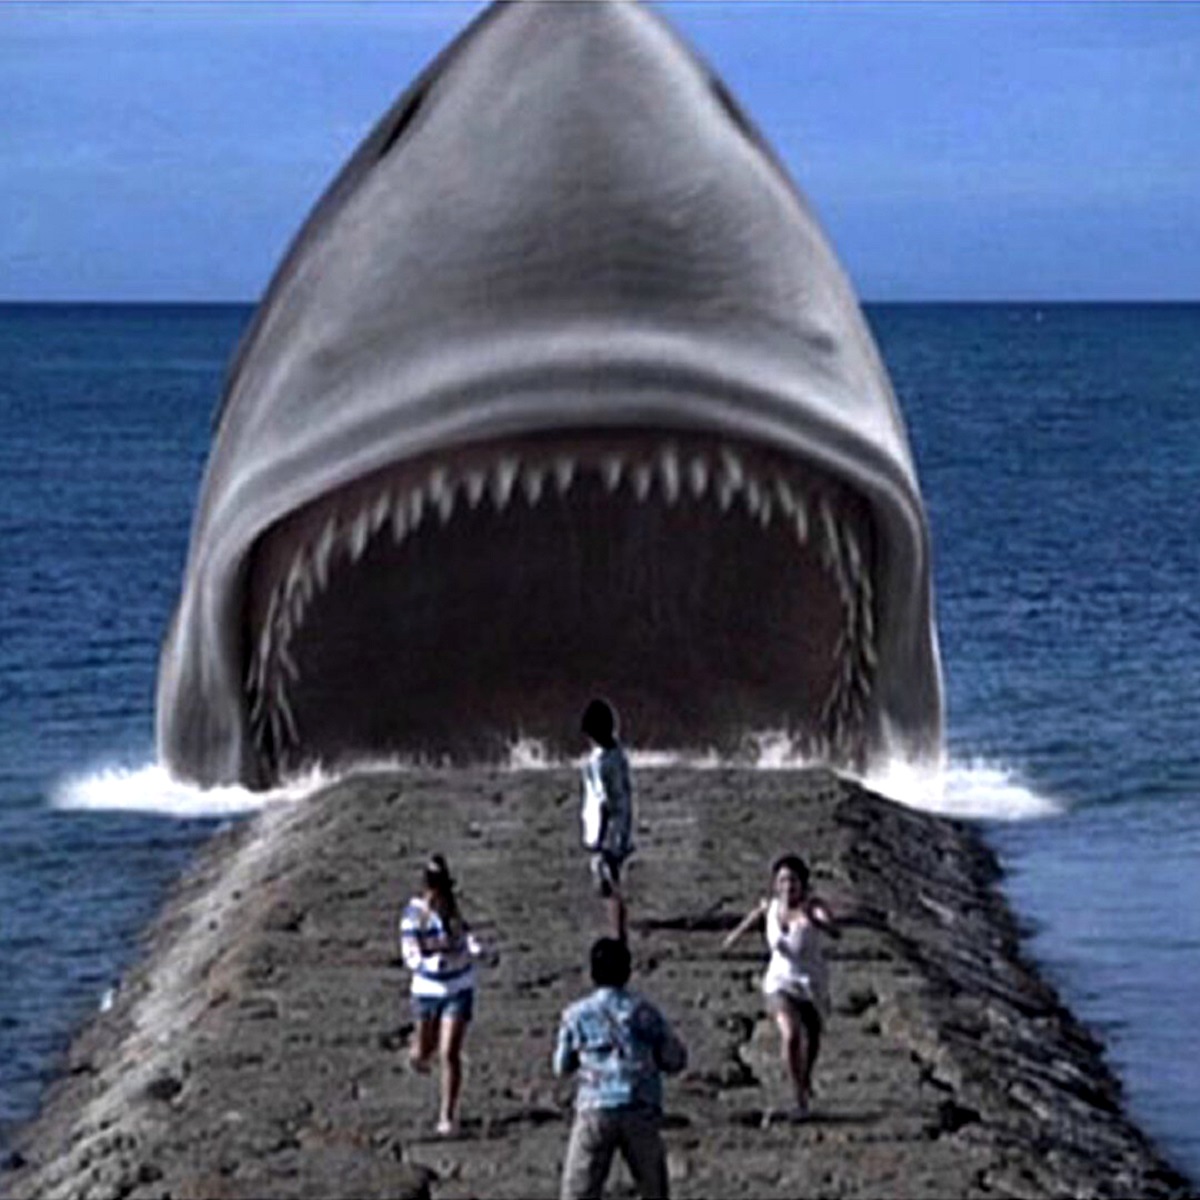 The shark appears at the end of the pier in Psycho Shark (2009) aka Jaws in Japan